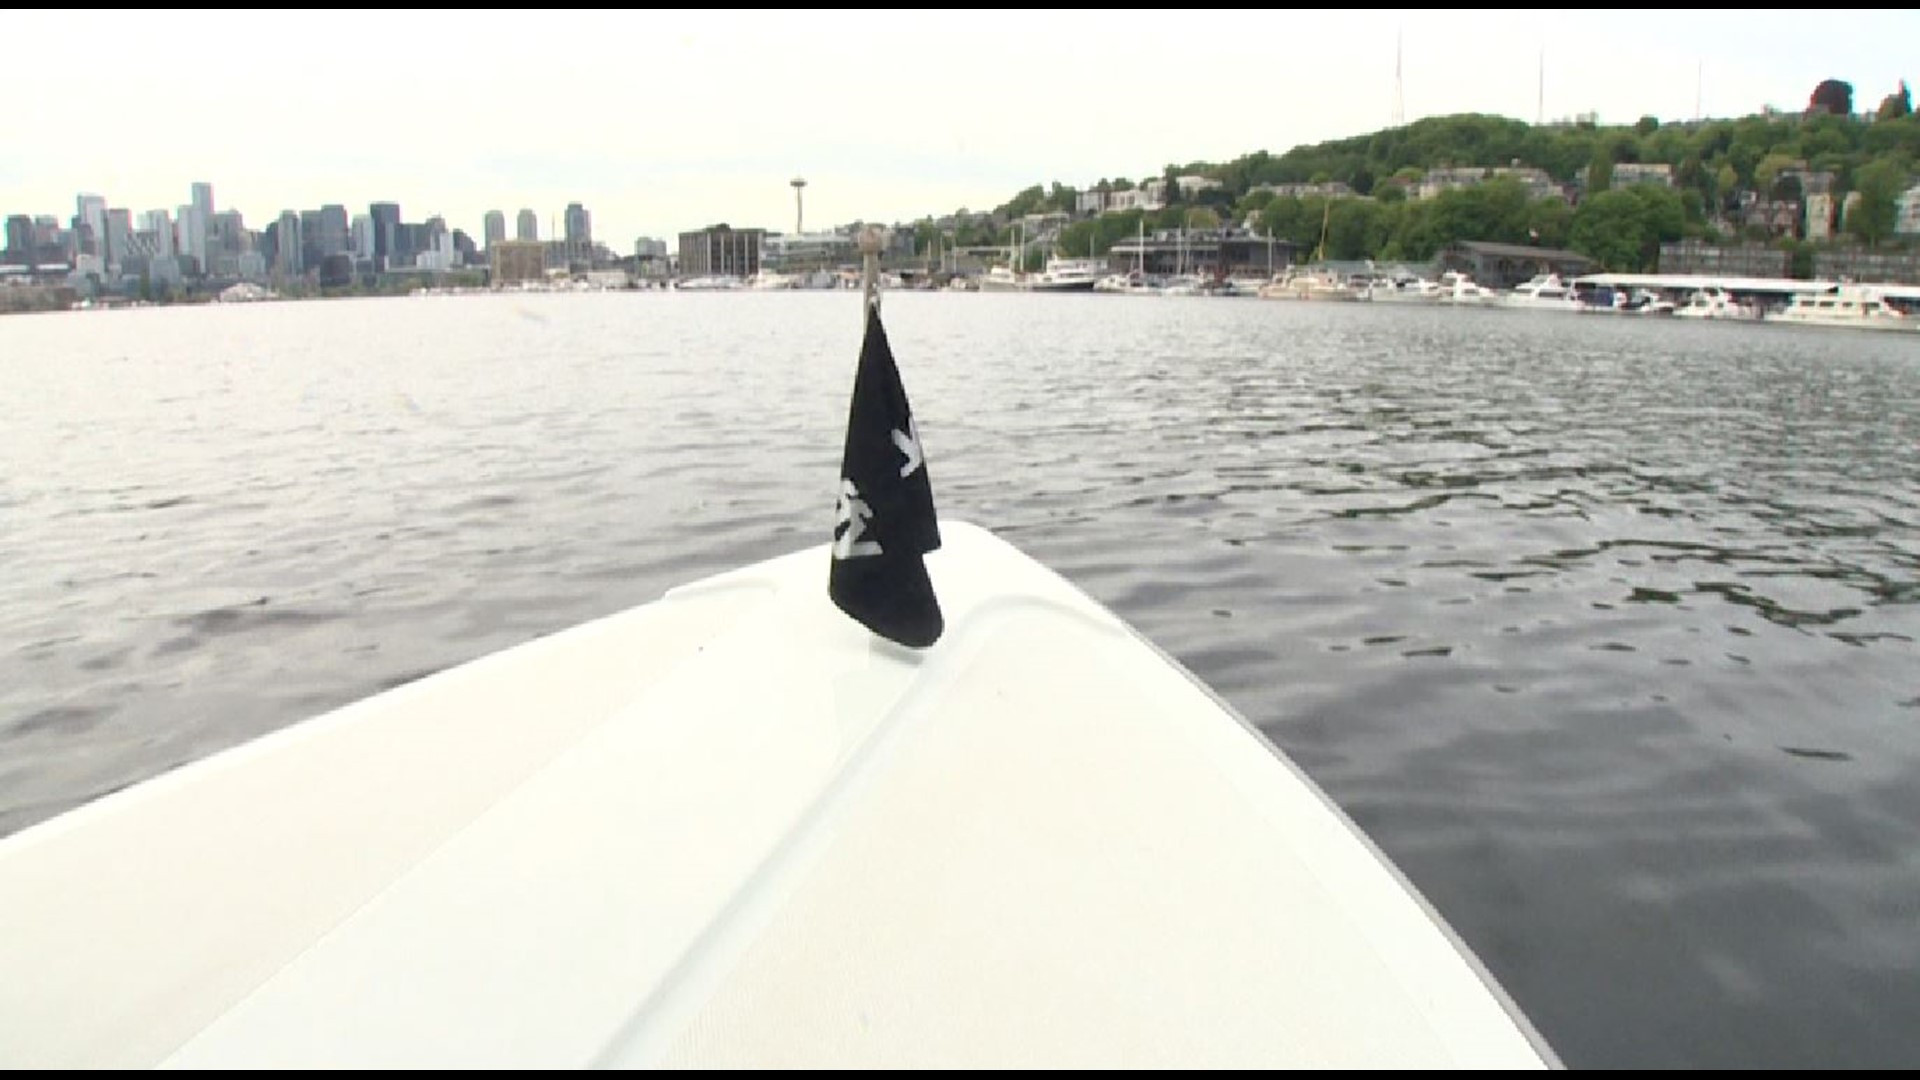 The Electric Boat Company can have you afloat on Lake Union to kick off the season. #k5evening